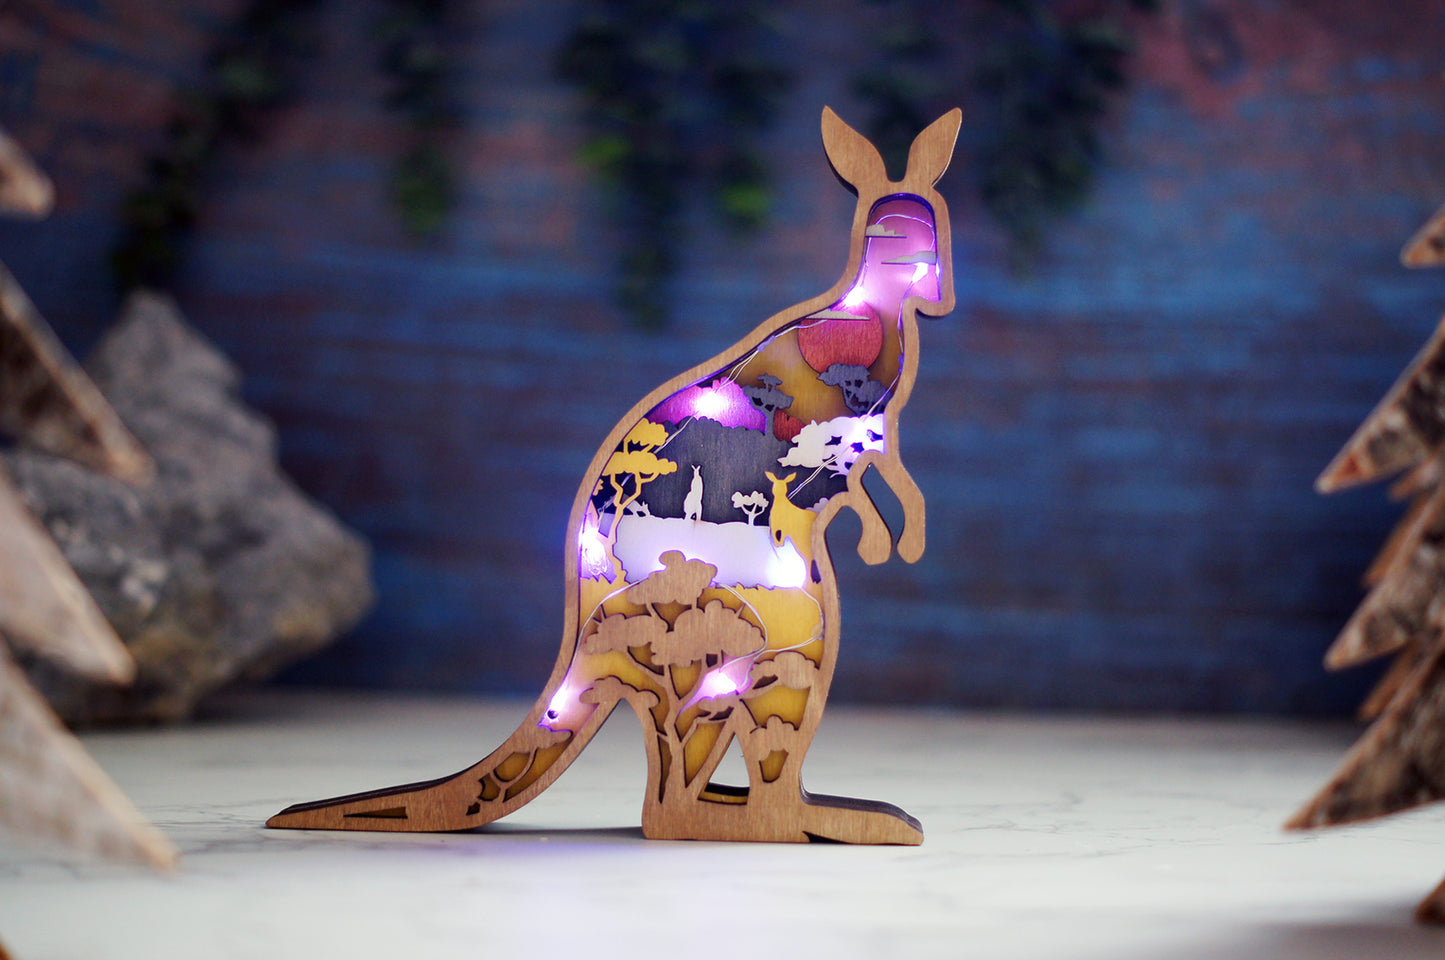 3D Wooden Kangaroo carved with lights ,Wooden Forest Scene,Desktop ornaments,Wall Decoration,Door Decor,Free Engraving